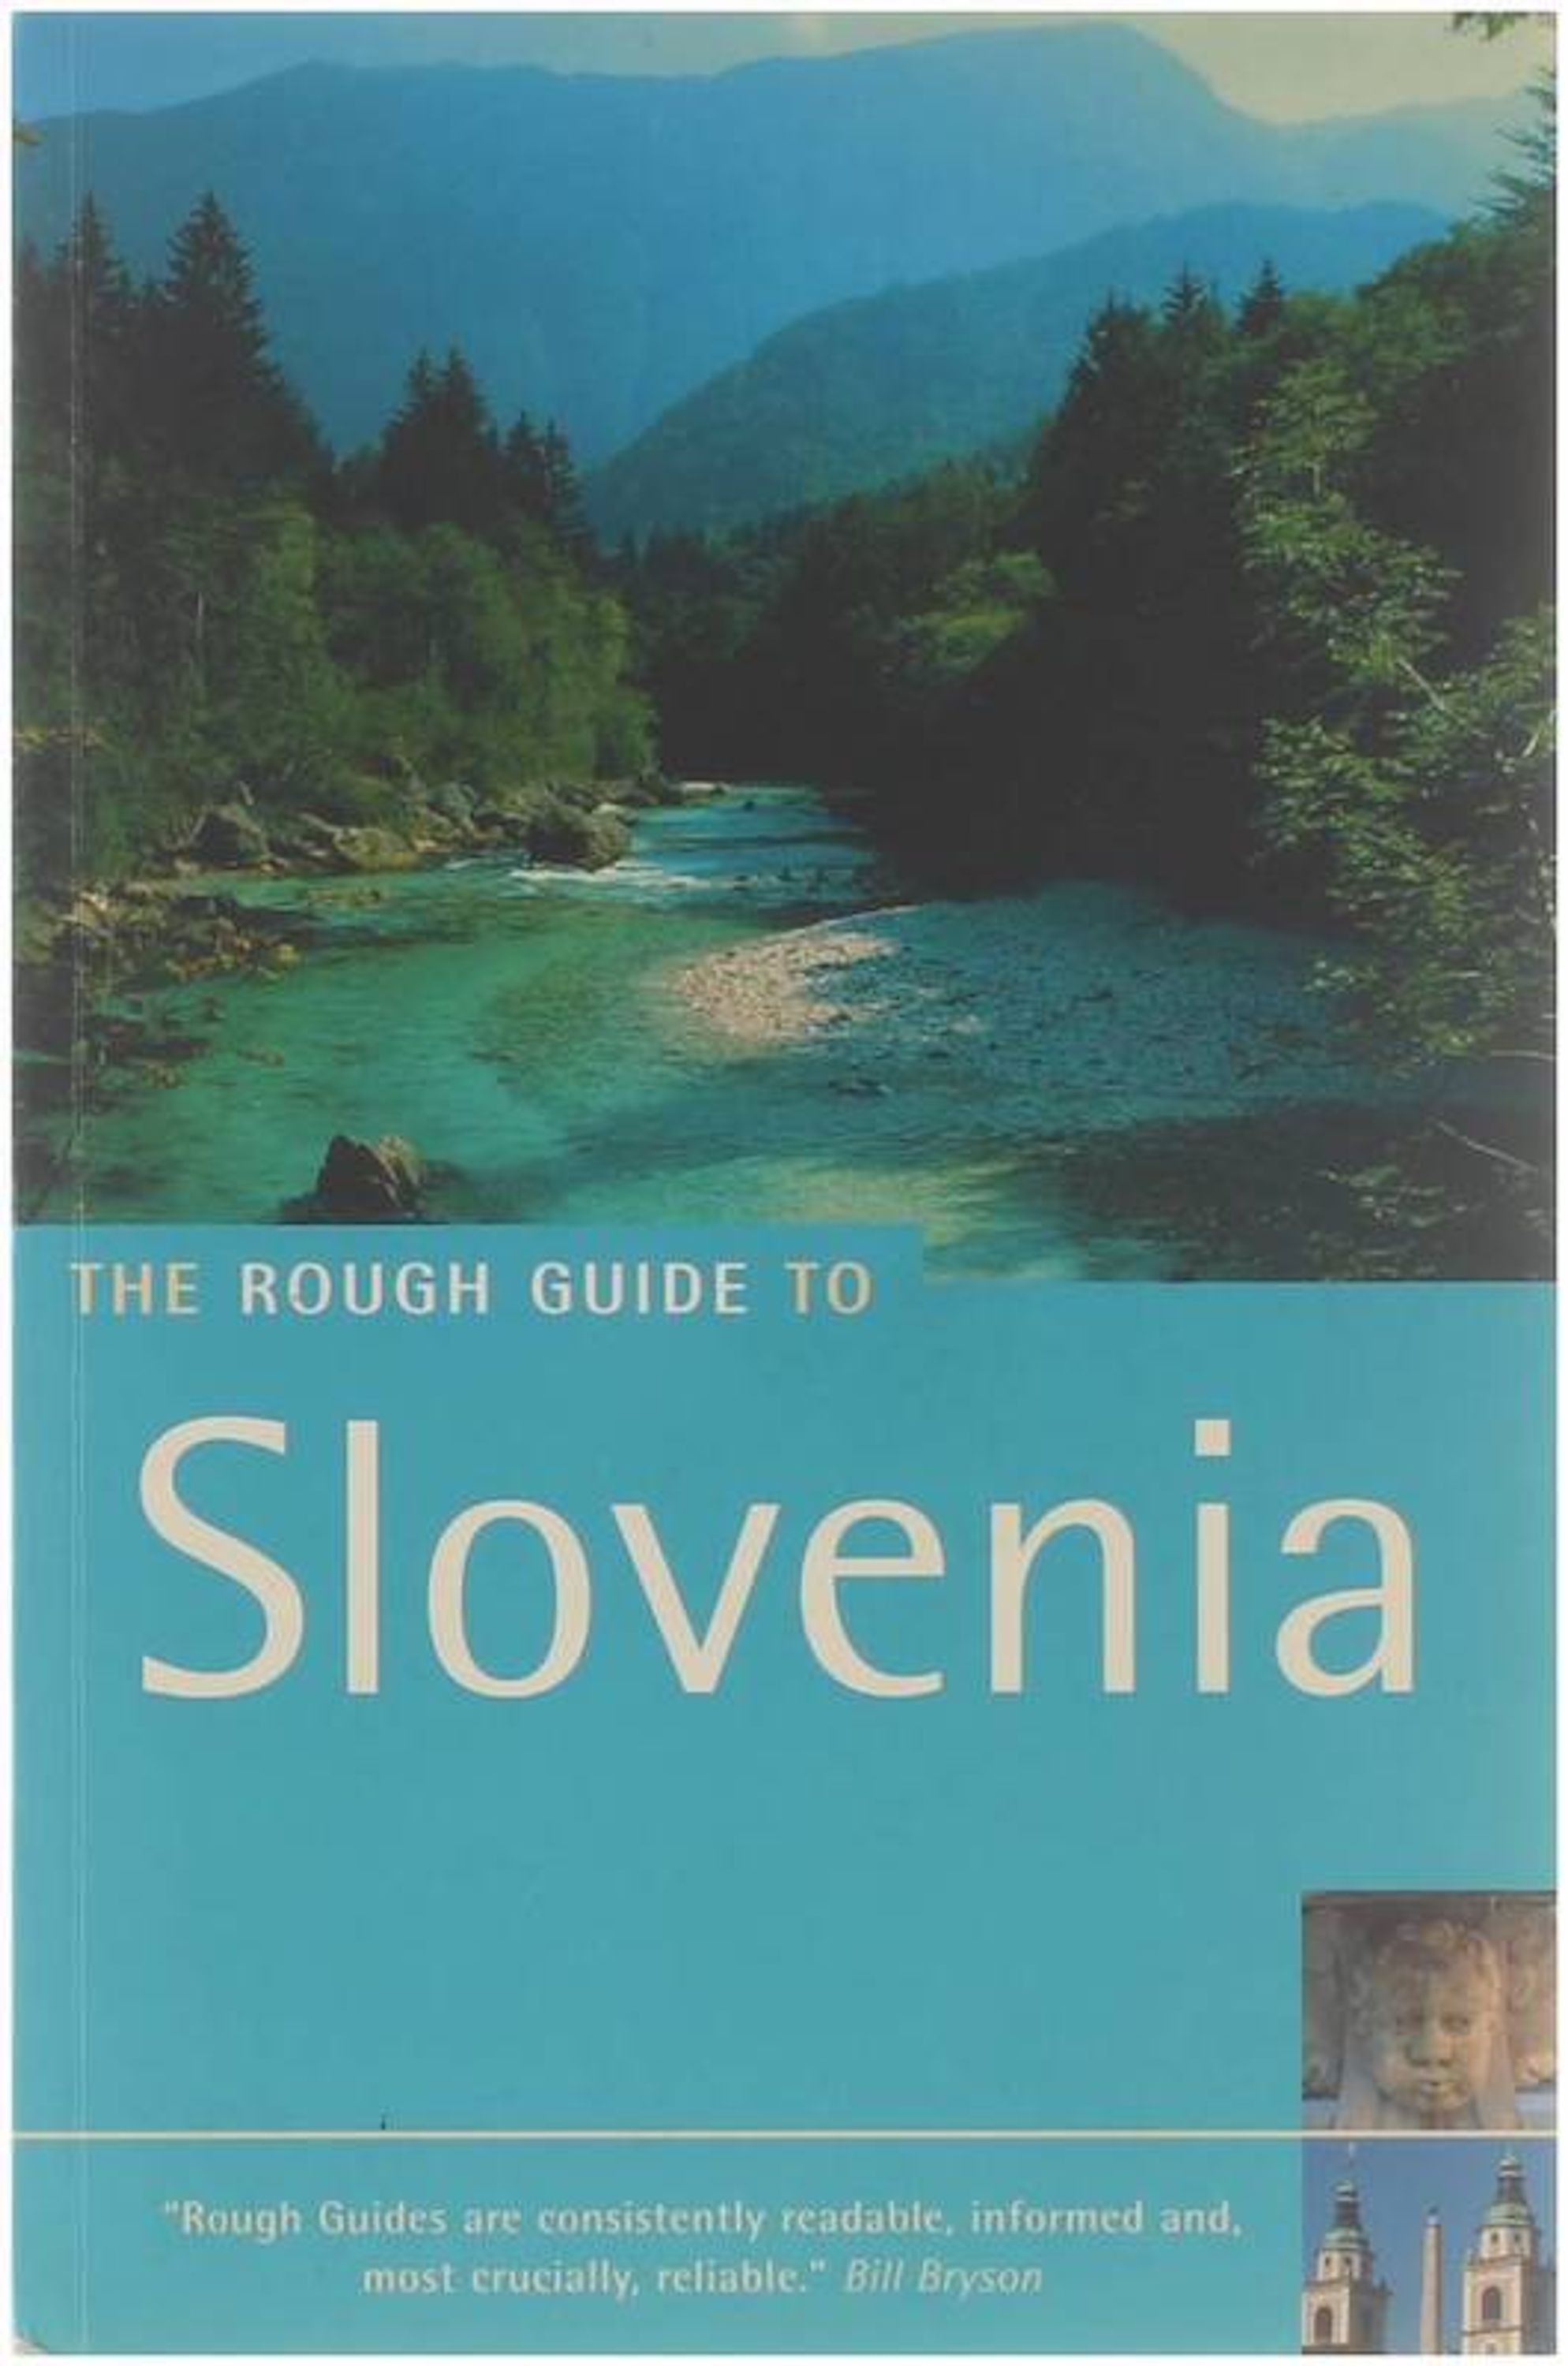 The rough guide to Slovenia - Norm Longley